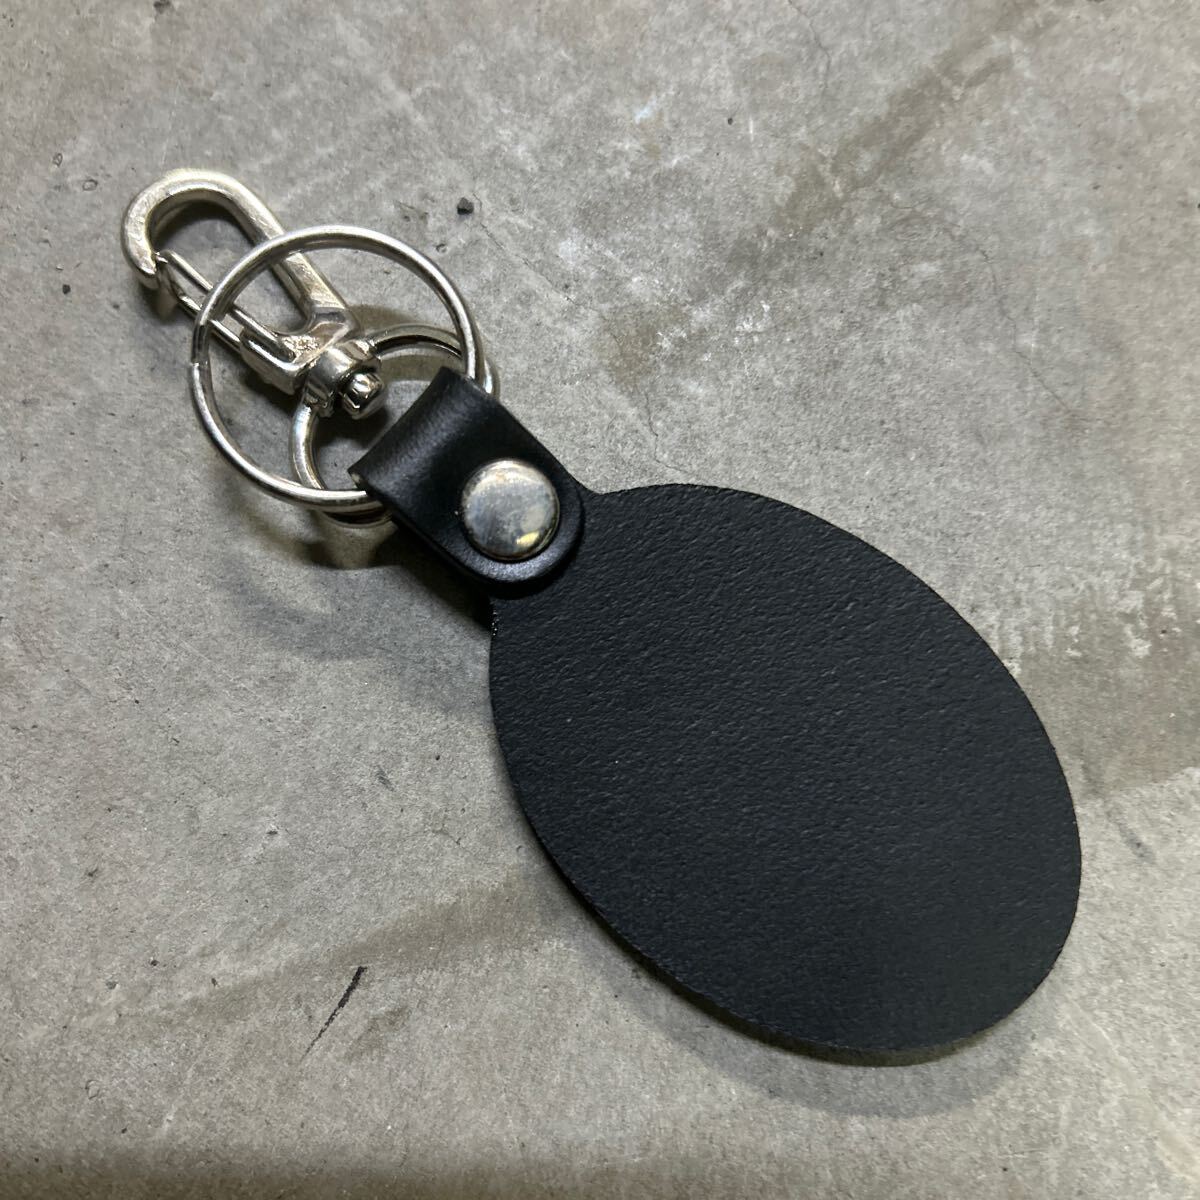 * outlet liquidation SIMPSON SK-12 BLACK Simpson kalabina attaching key holder bike accessory small articles new goods records out of production goods A60415-3